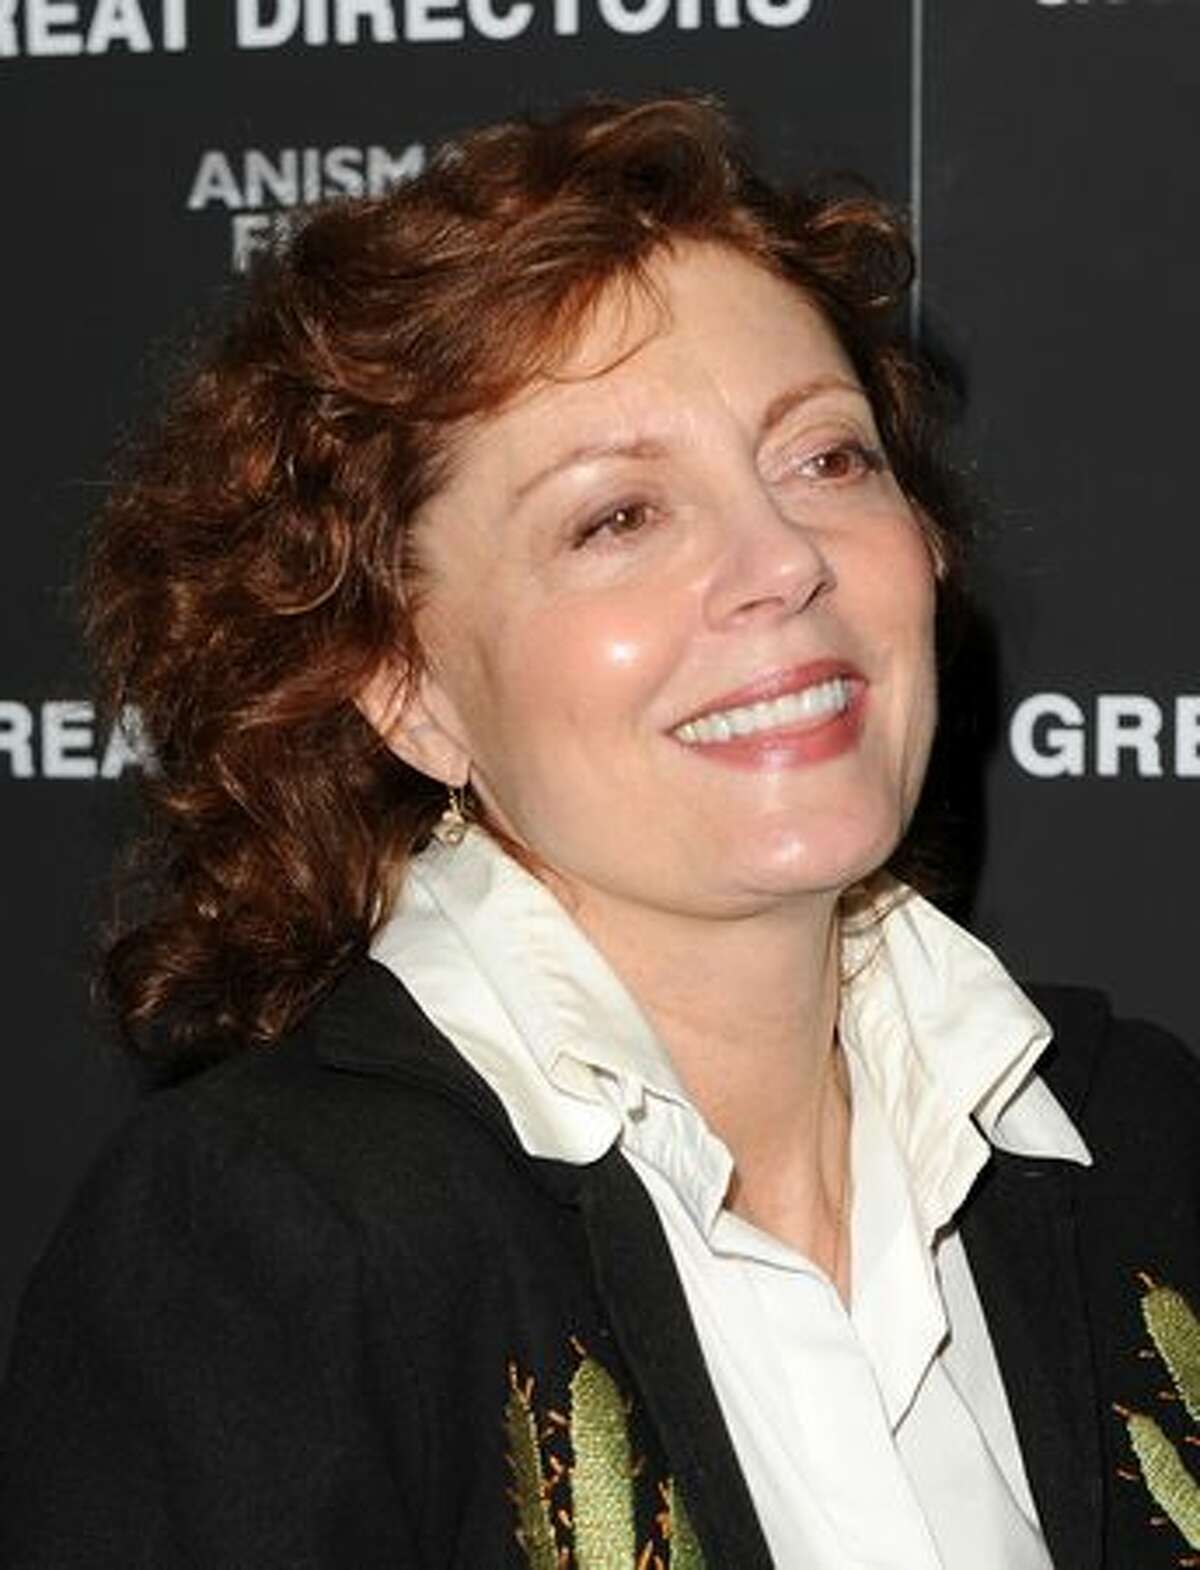 Actress Susan Sarandon attends the premiere of "Great Directors" premiere at The Museum of Modern Art.